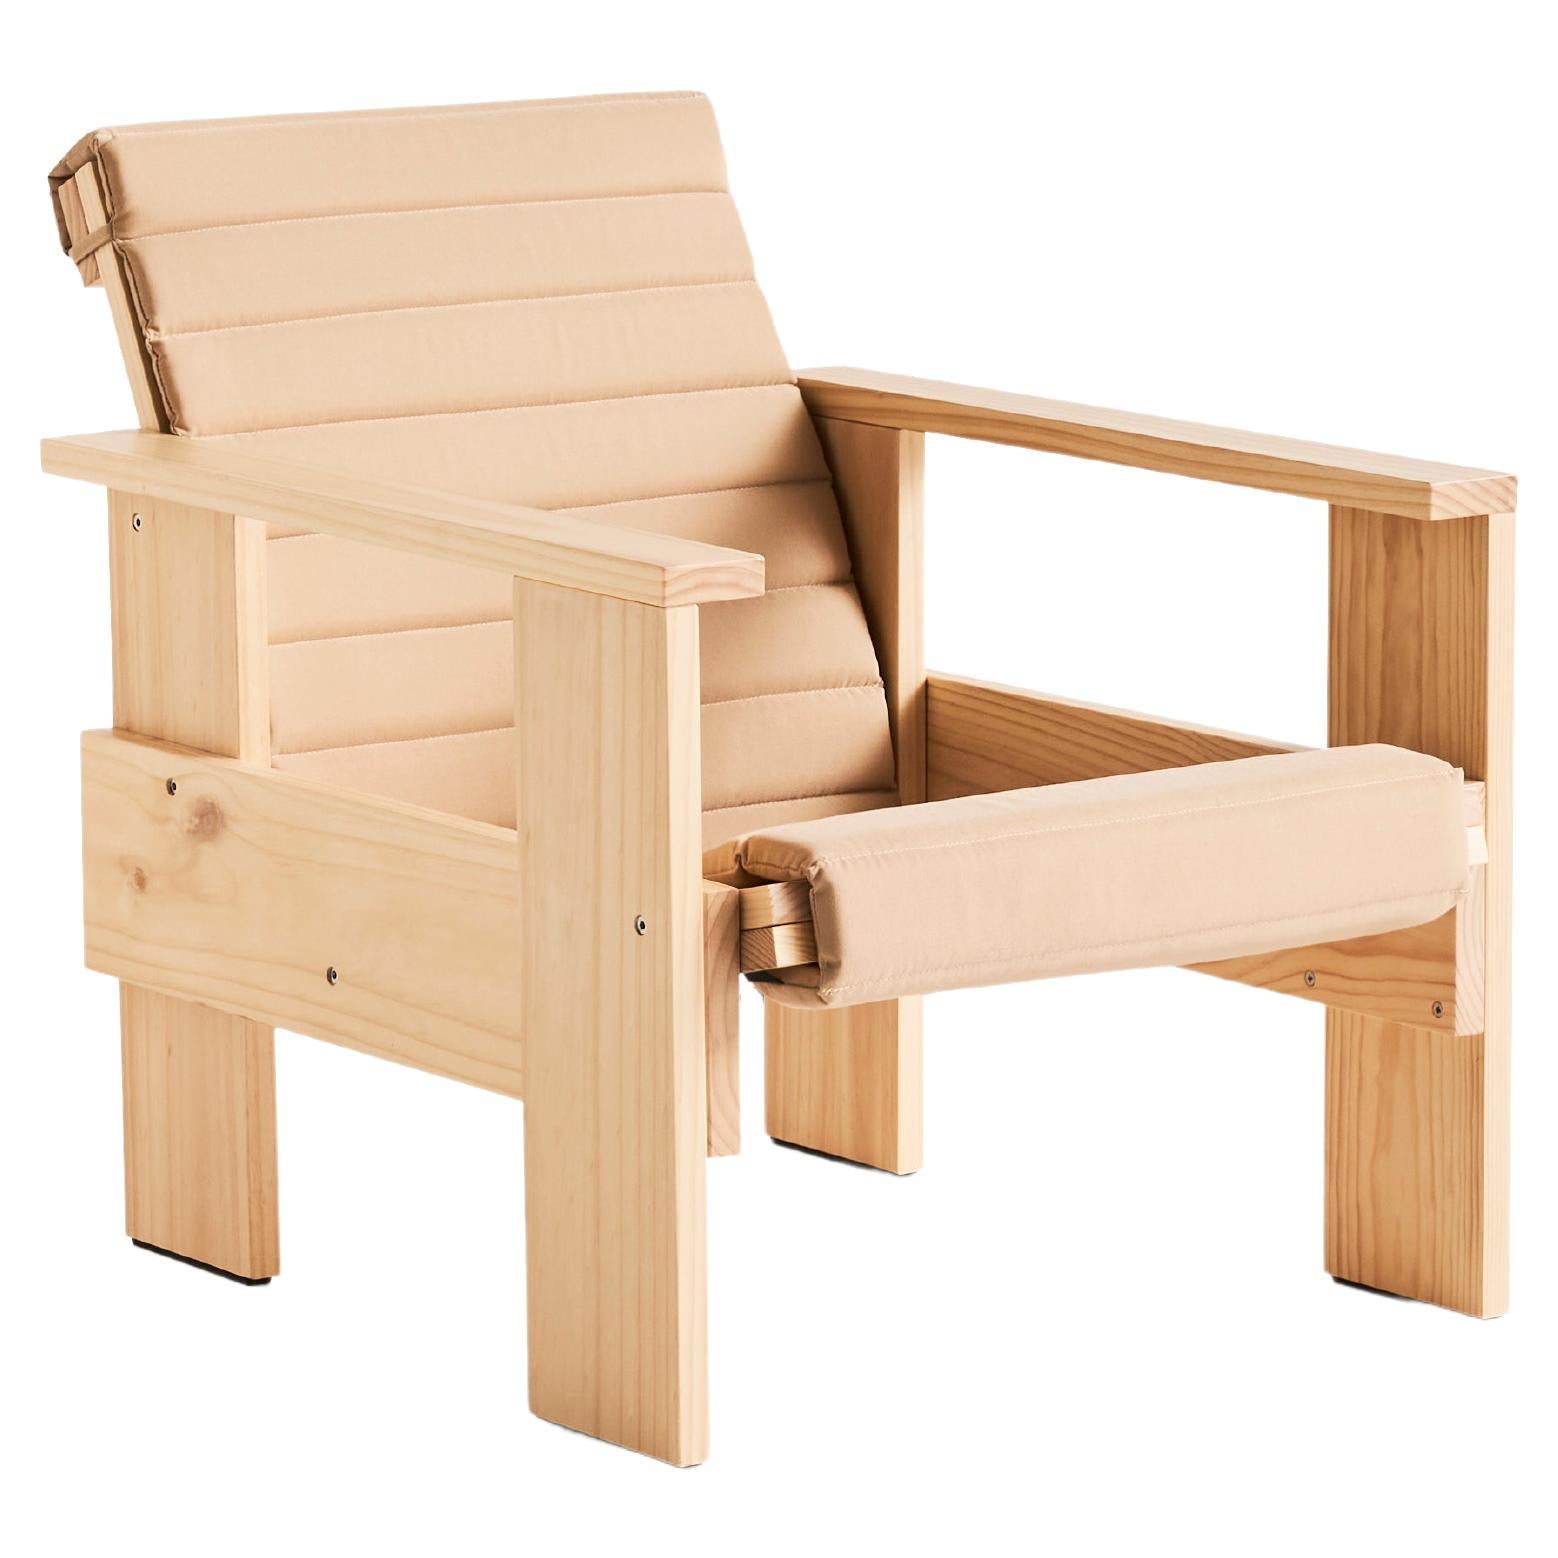 Crate Lounge Chair, Wb Lacquered Pinewood/ Q Cushion, by Gerrit Rietveld for Hay For Sale